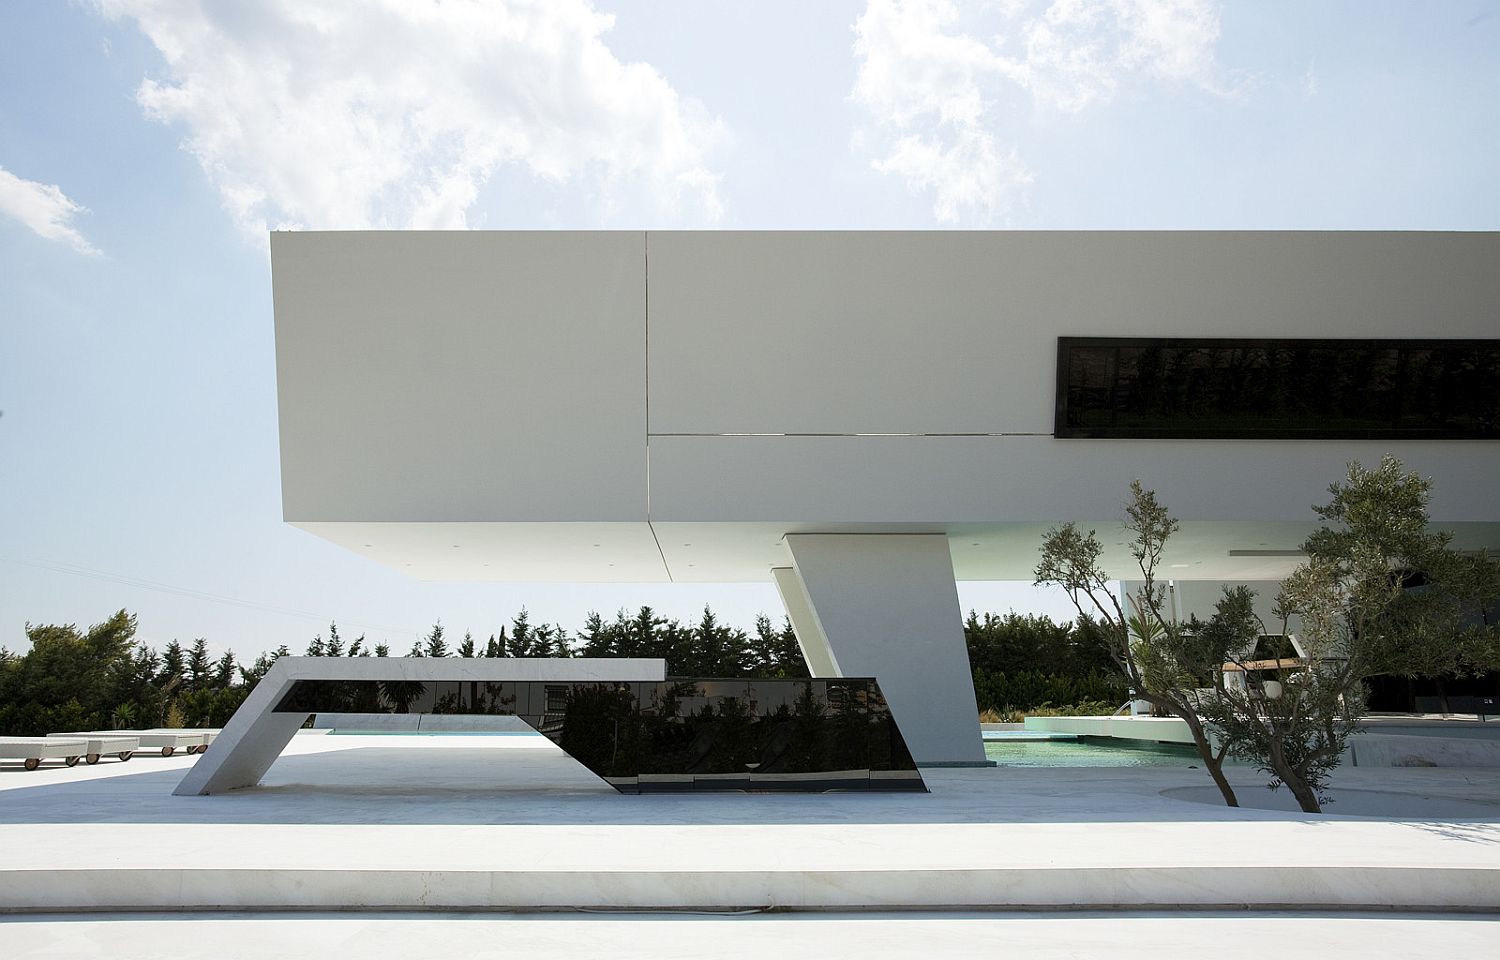 Cantilevered structure of the house offers natural shade